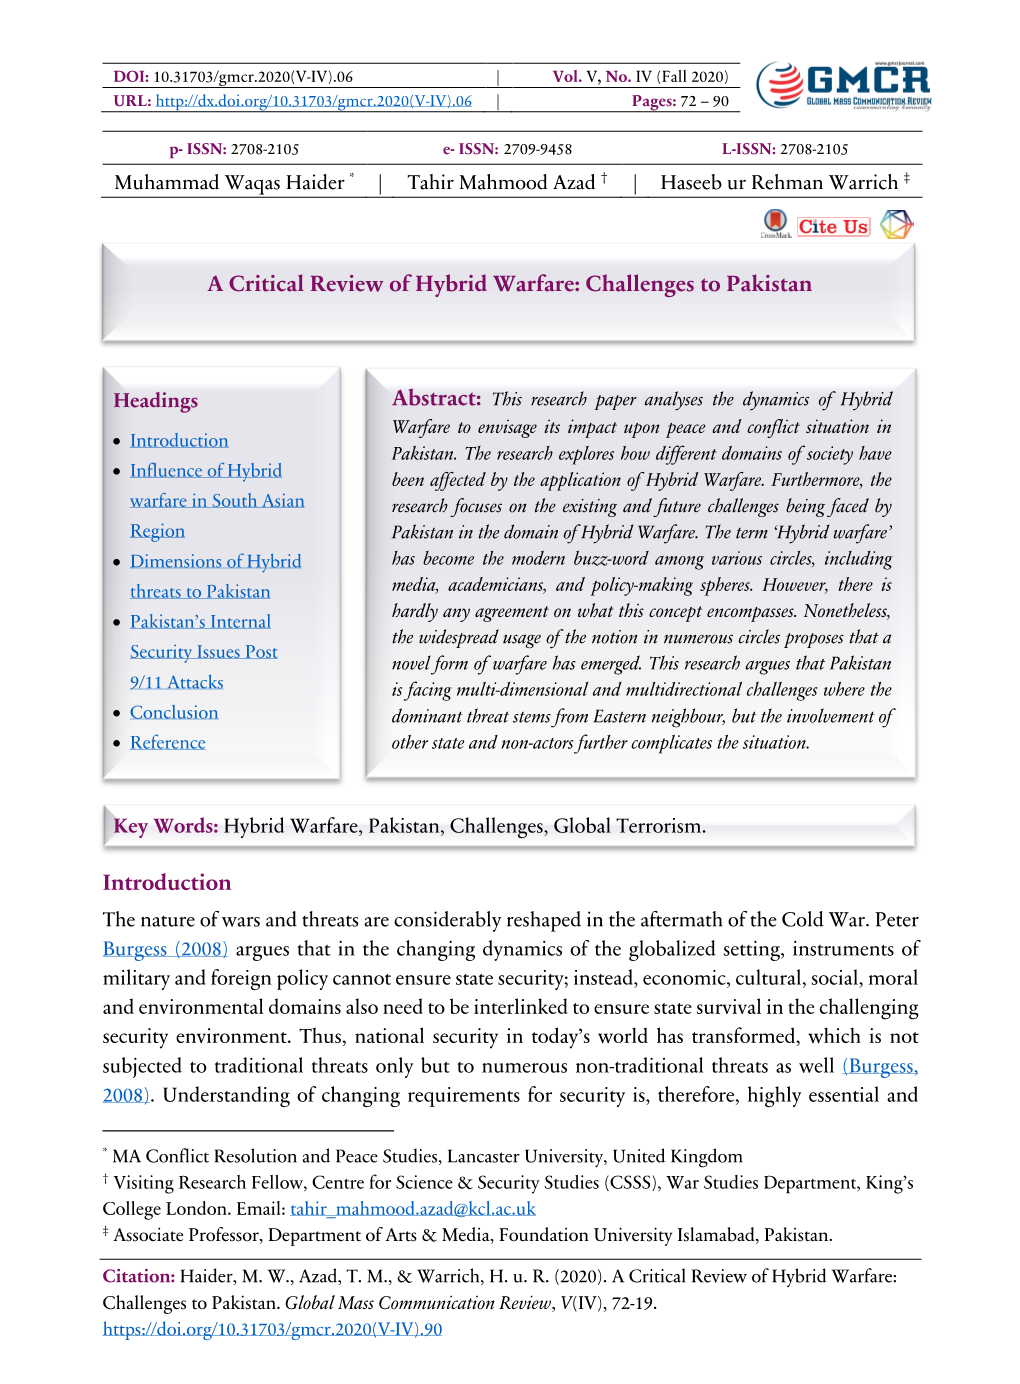 A Critical Review of Hybrid Warfare: Challenges to Pakistan Introduction